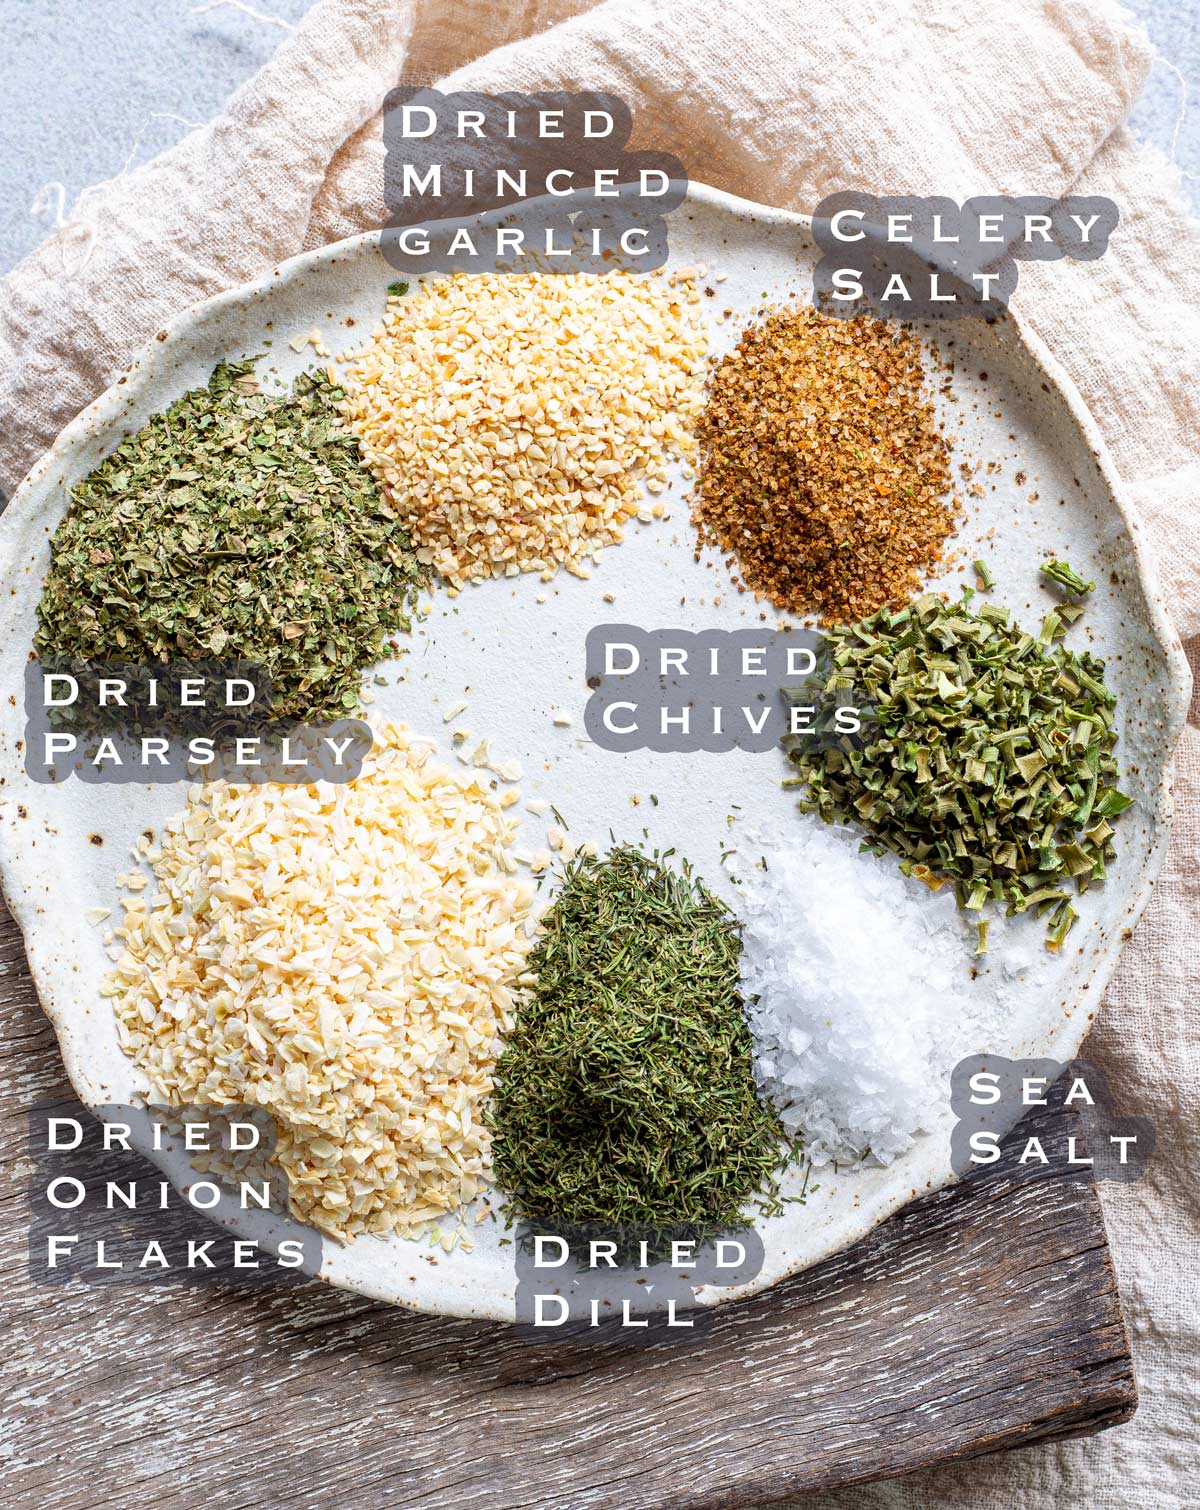 a plate with piles of herbs on it showing the ingredients for dill seasoning blend